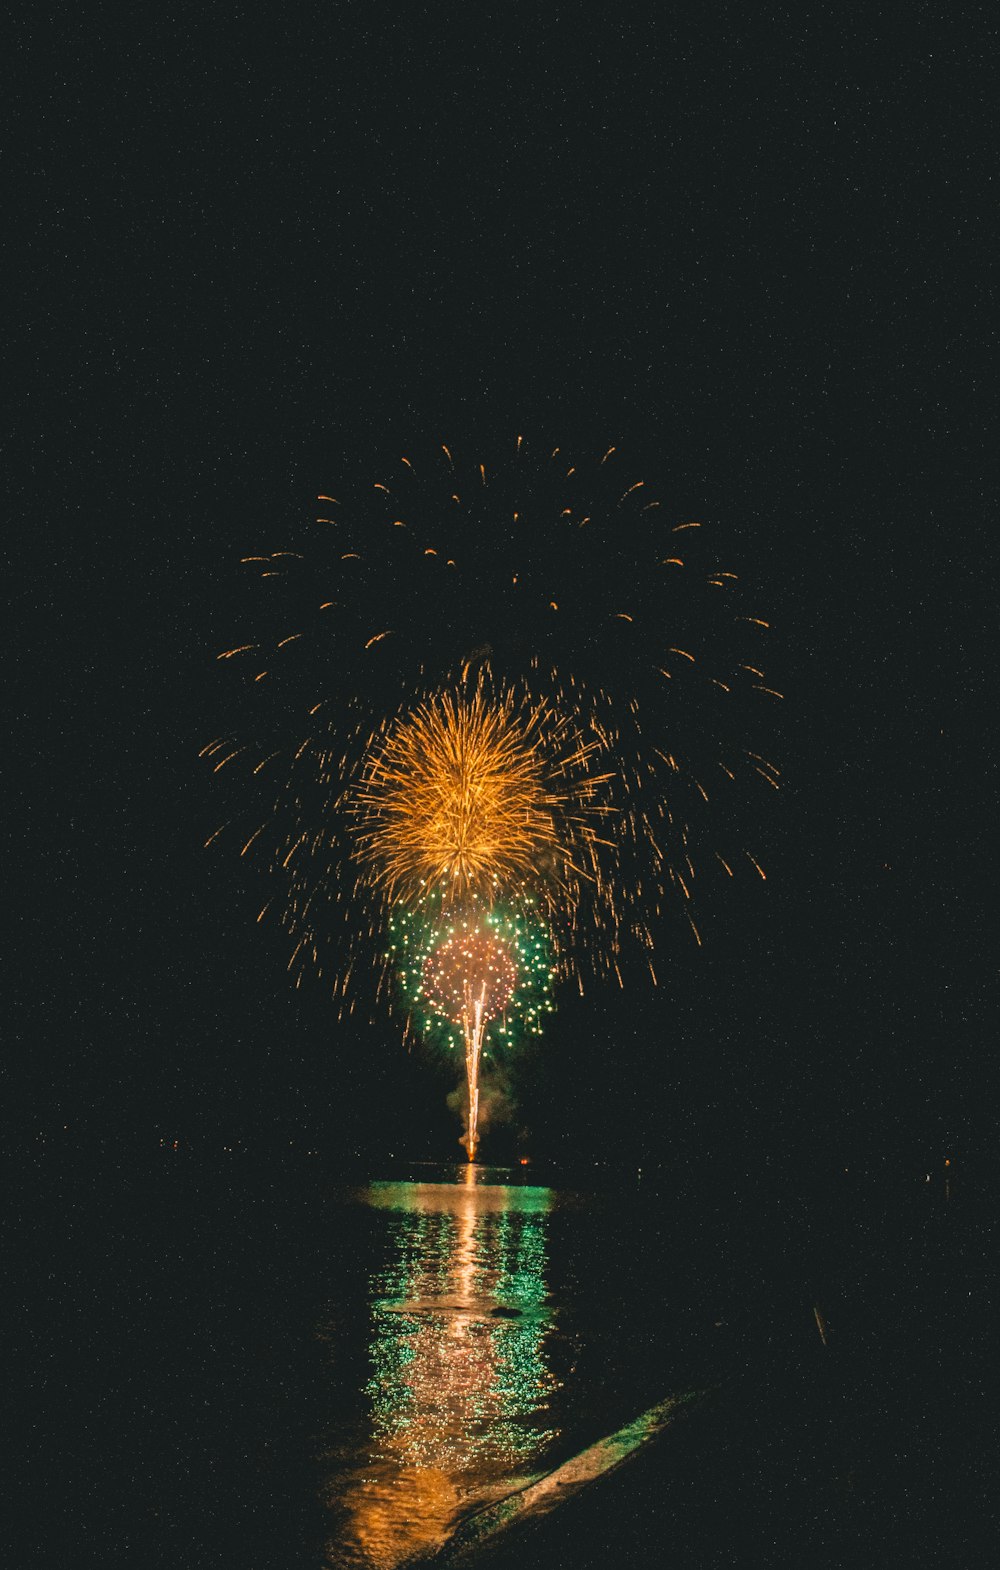 a firework display in the night sky over a body of water